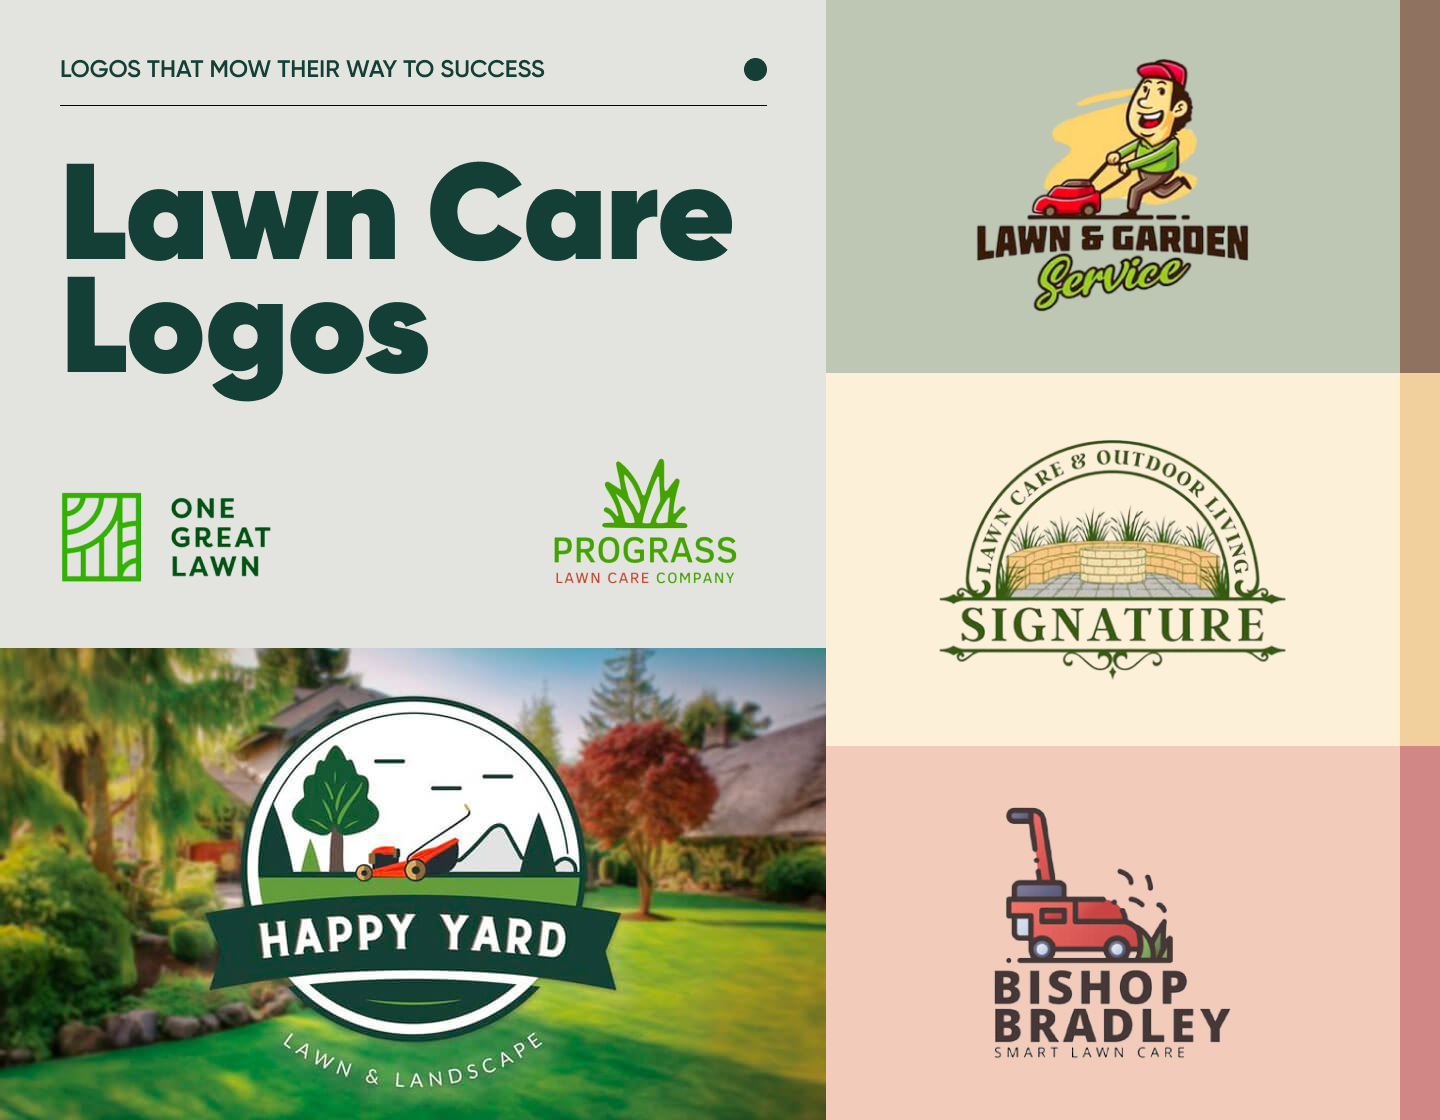 16 Memorable Lawn Care Logos That Mow Their Way to Success